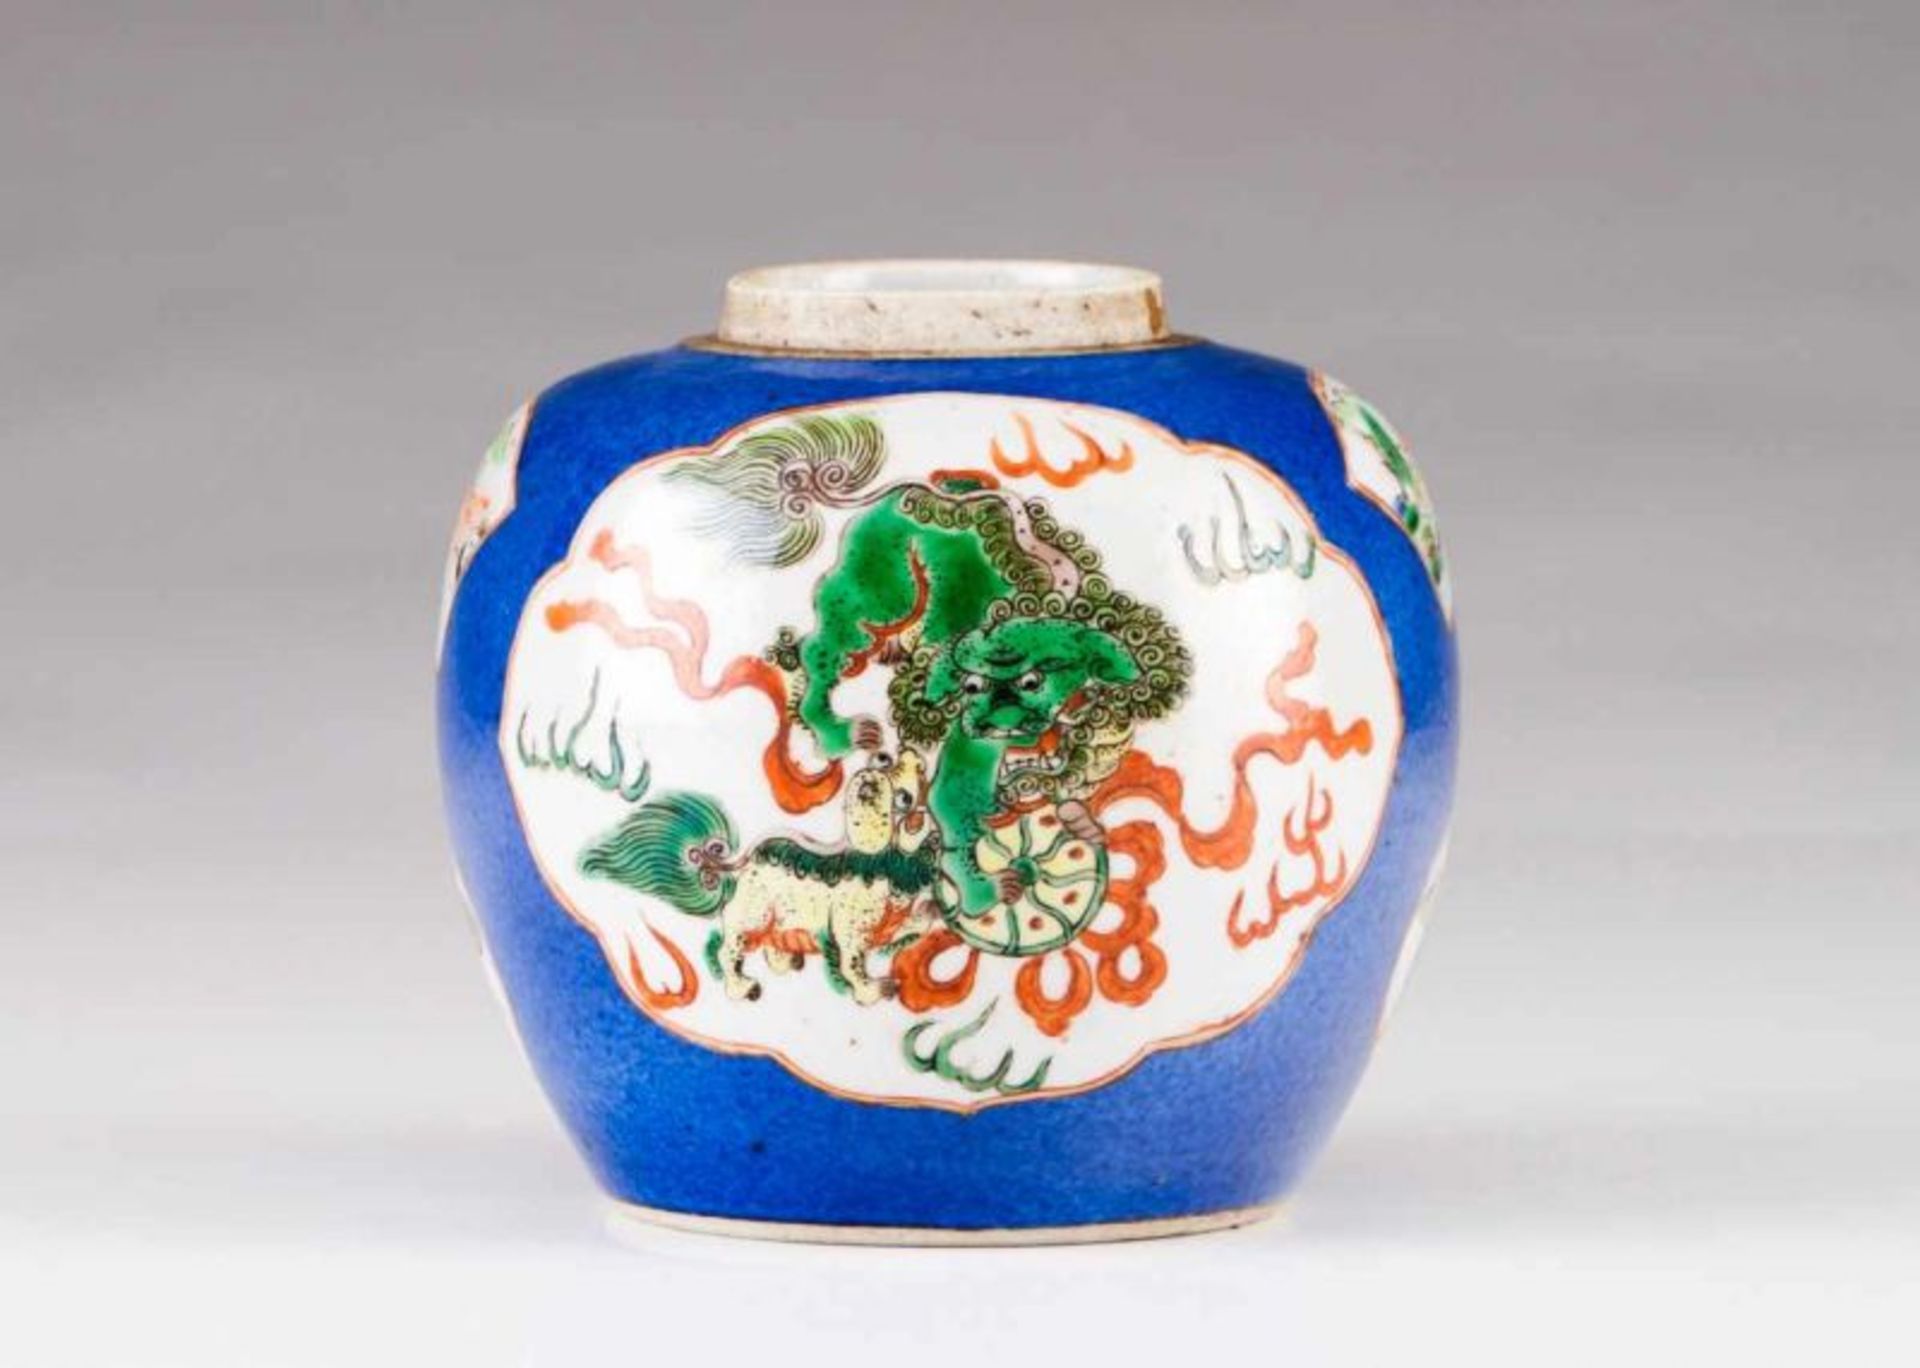 A small vase Chinese porcelain Polychrome Famille Verte decoration with butterflies and dragons on